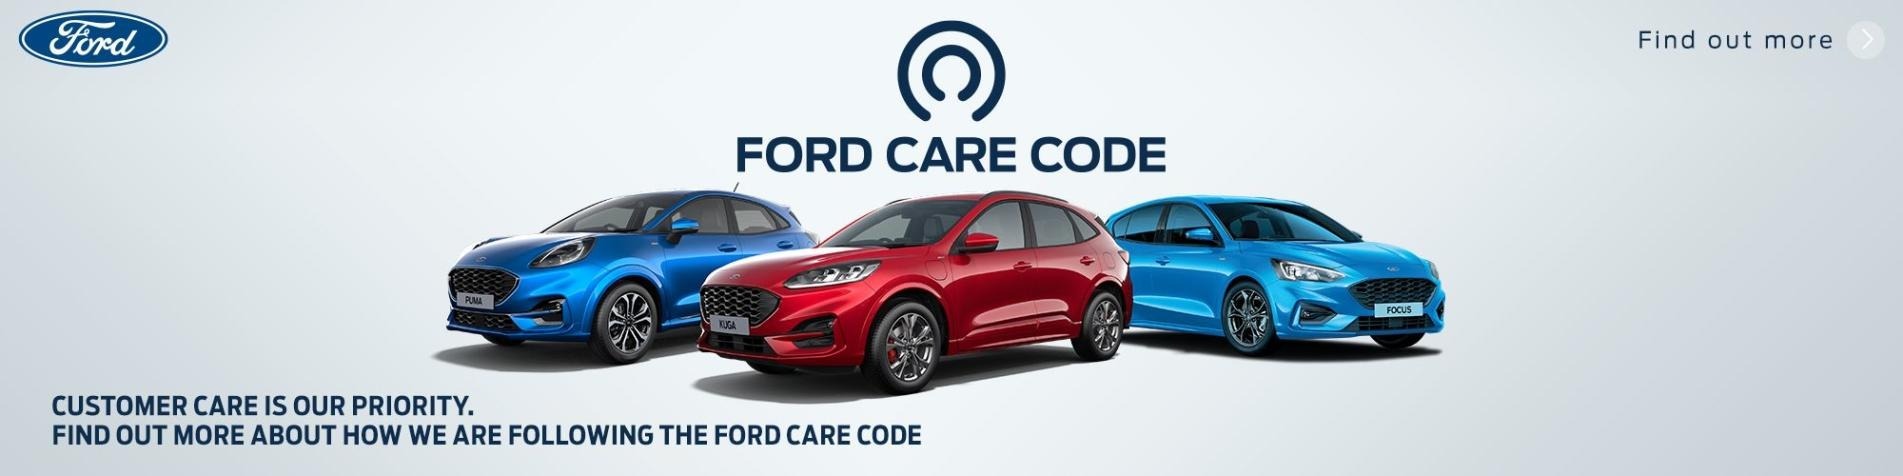 Ford Care code banner